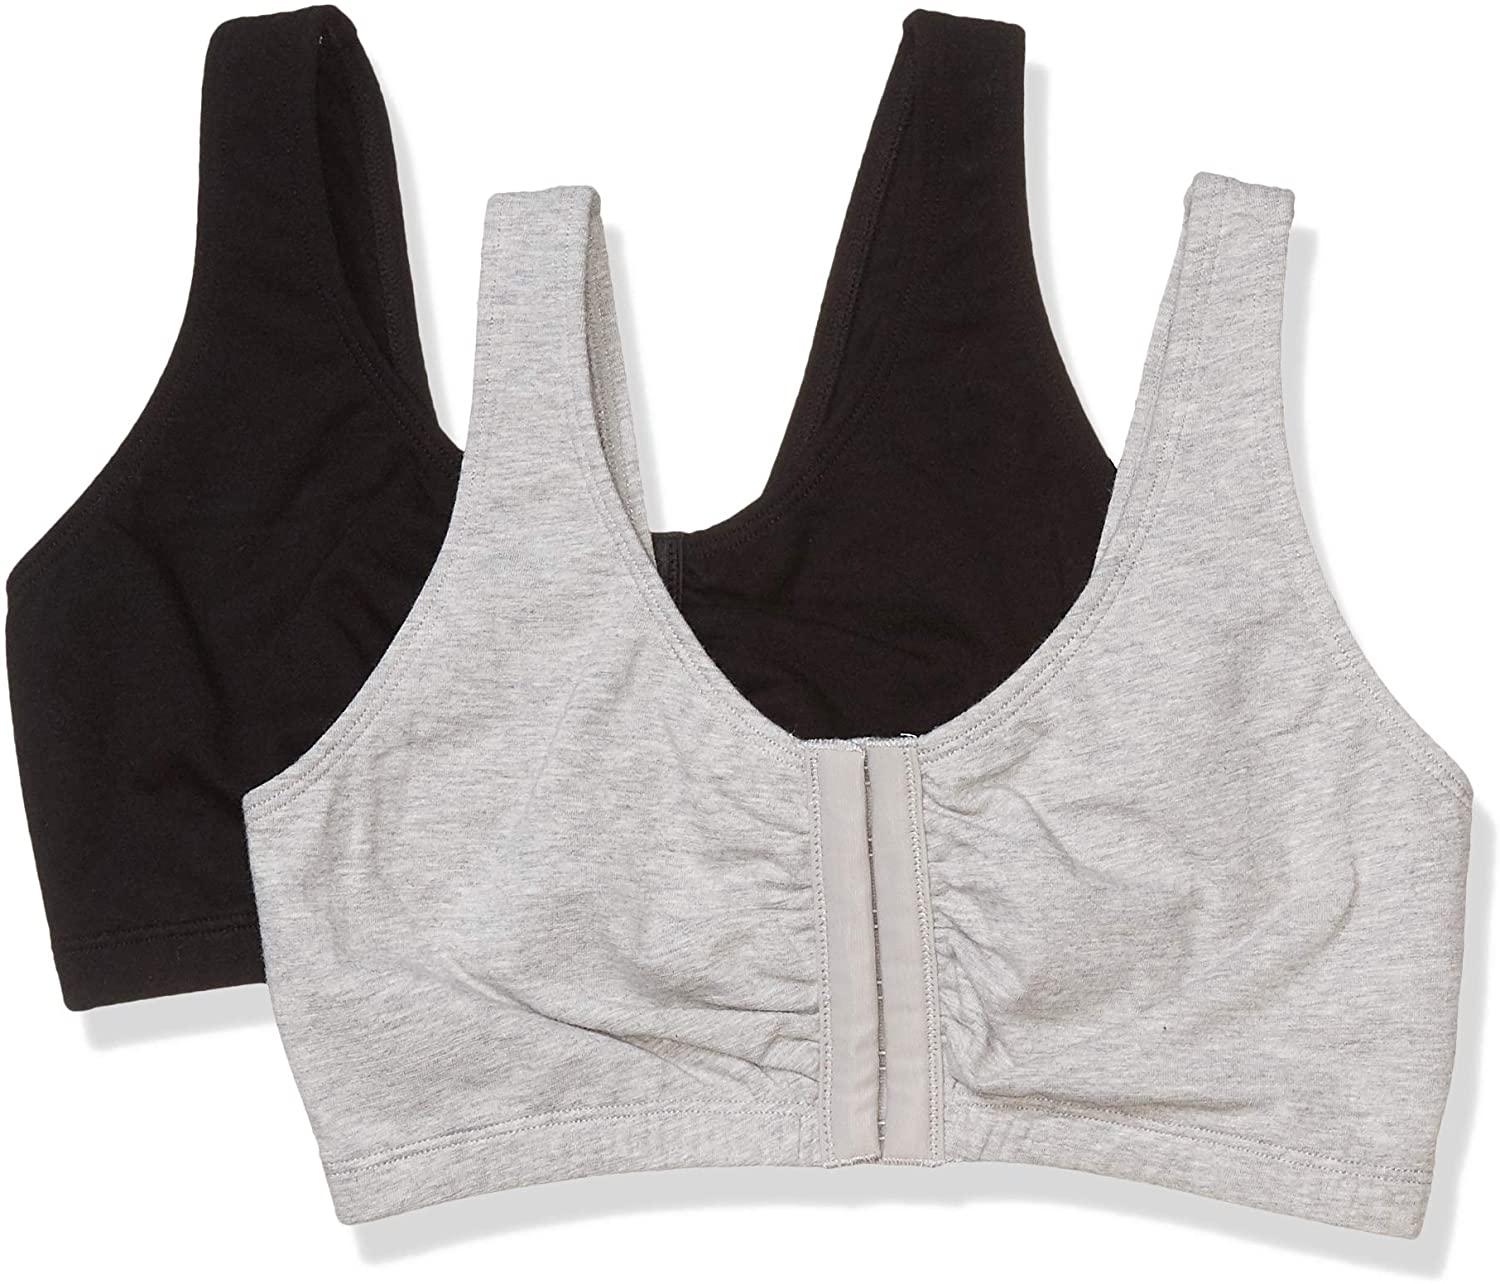 Fruit of the Loom Women's Front Close Builtup Sports Bra | eBay